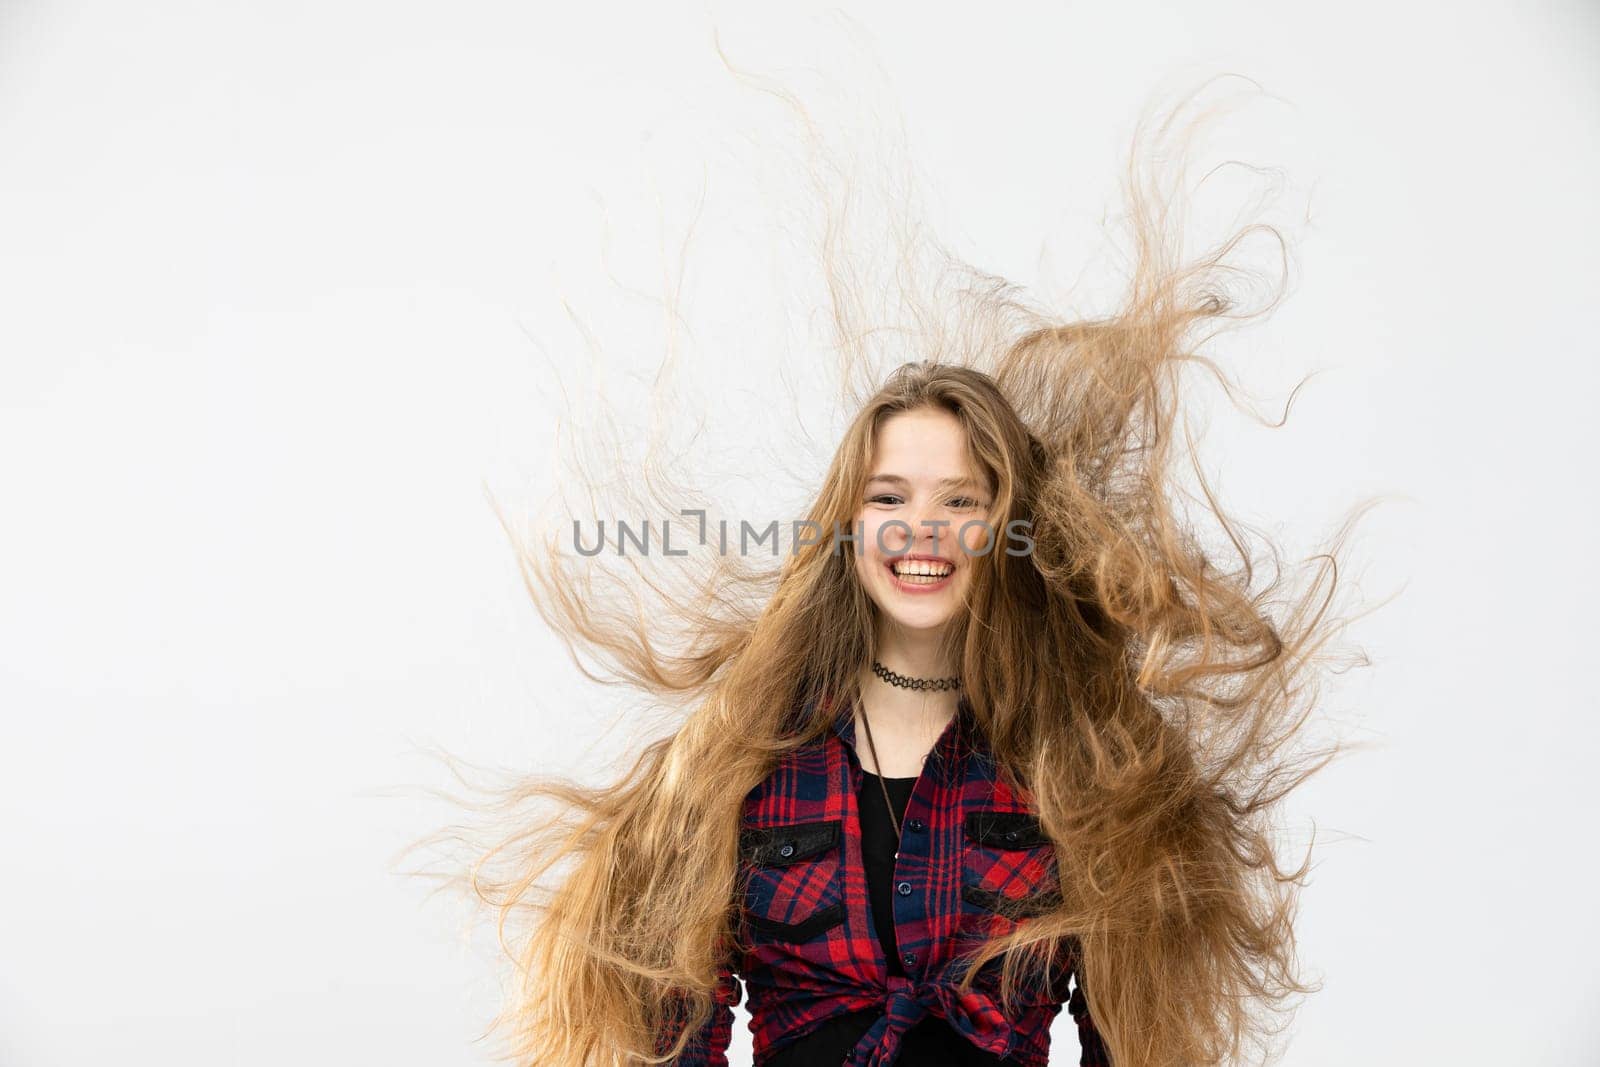 A girl in a checkered shirt tied in a knot laughs. A wind blows from behind and blows the girl's hair away. The long brown hair flies in all directions and tangles.